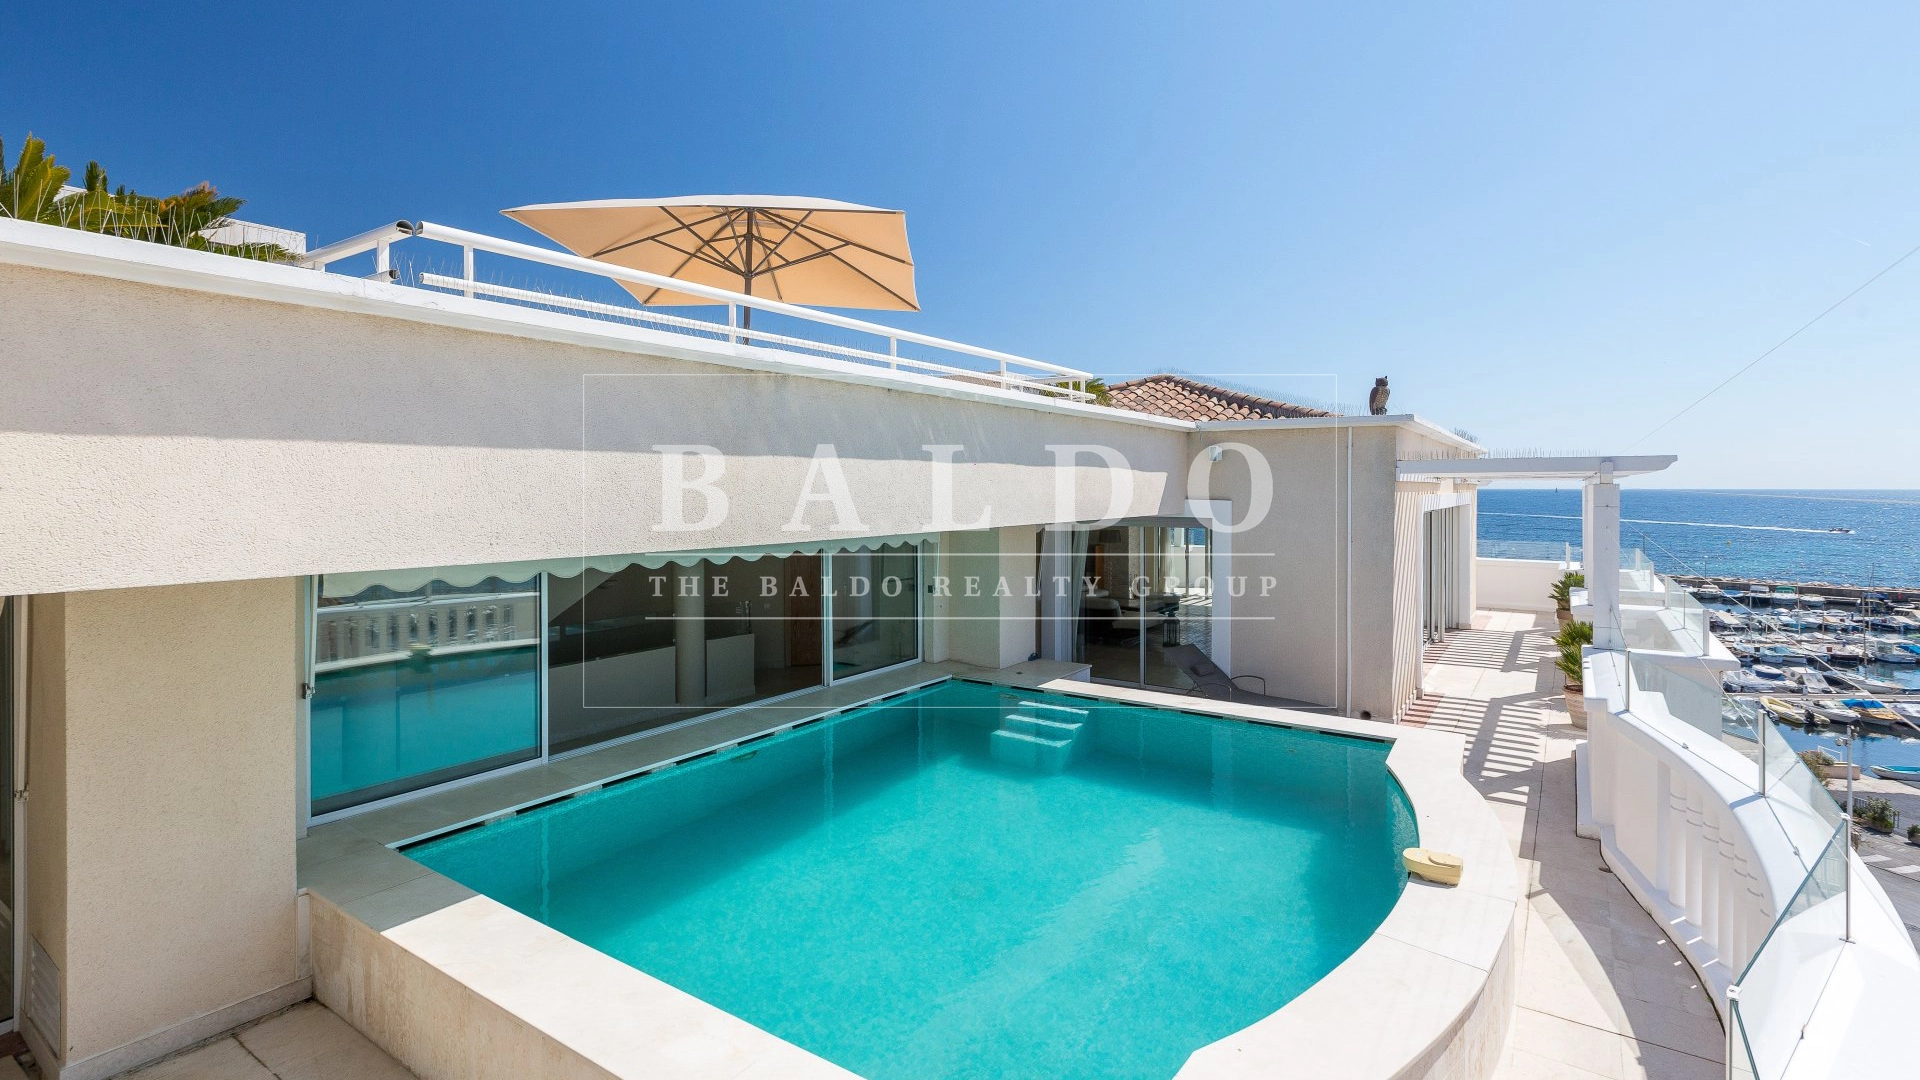 PENTHOUSE IN CANNES PALM BEACH - Photo 1